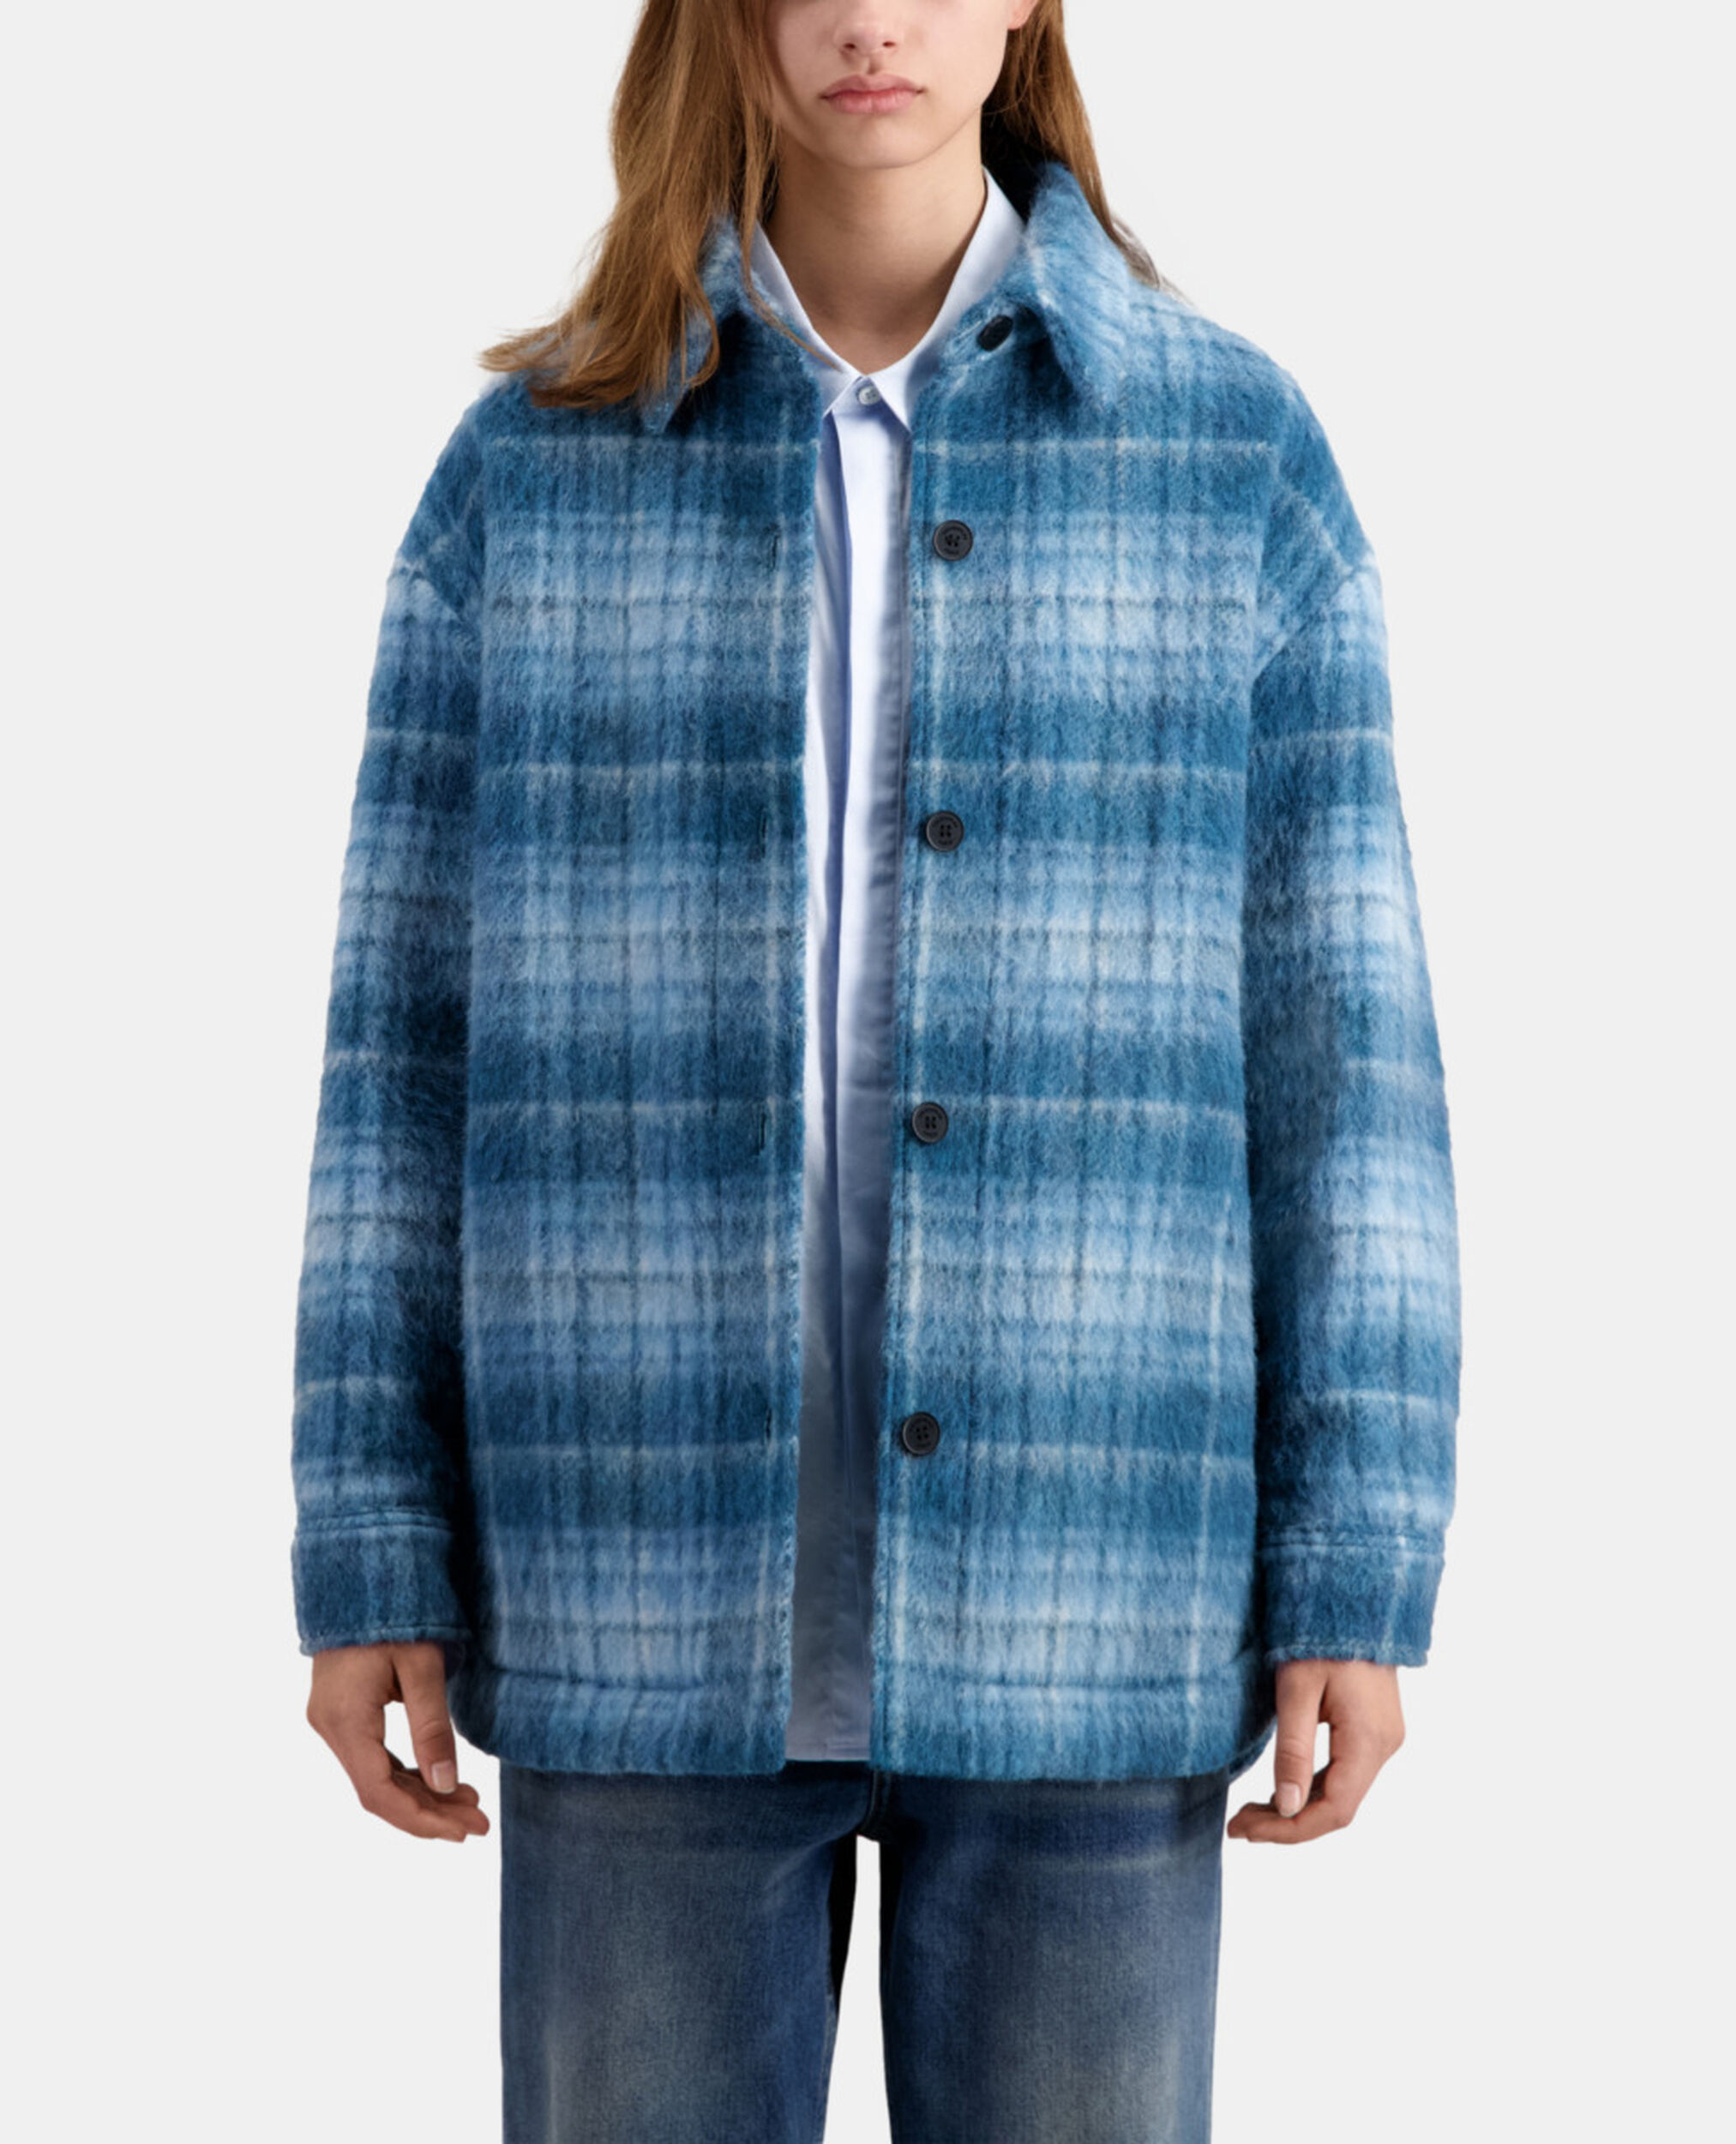 Overshirt style jacket with blue checks, BLUE BEIGE, hi-res image number null